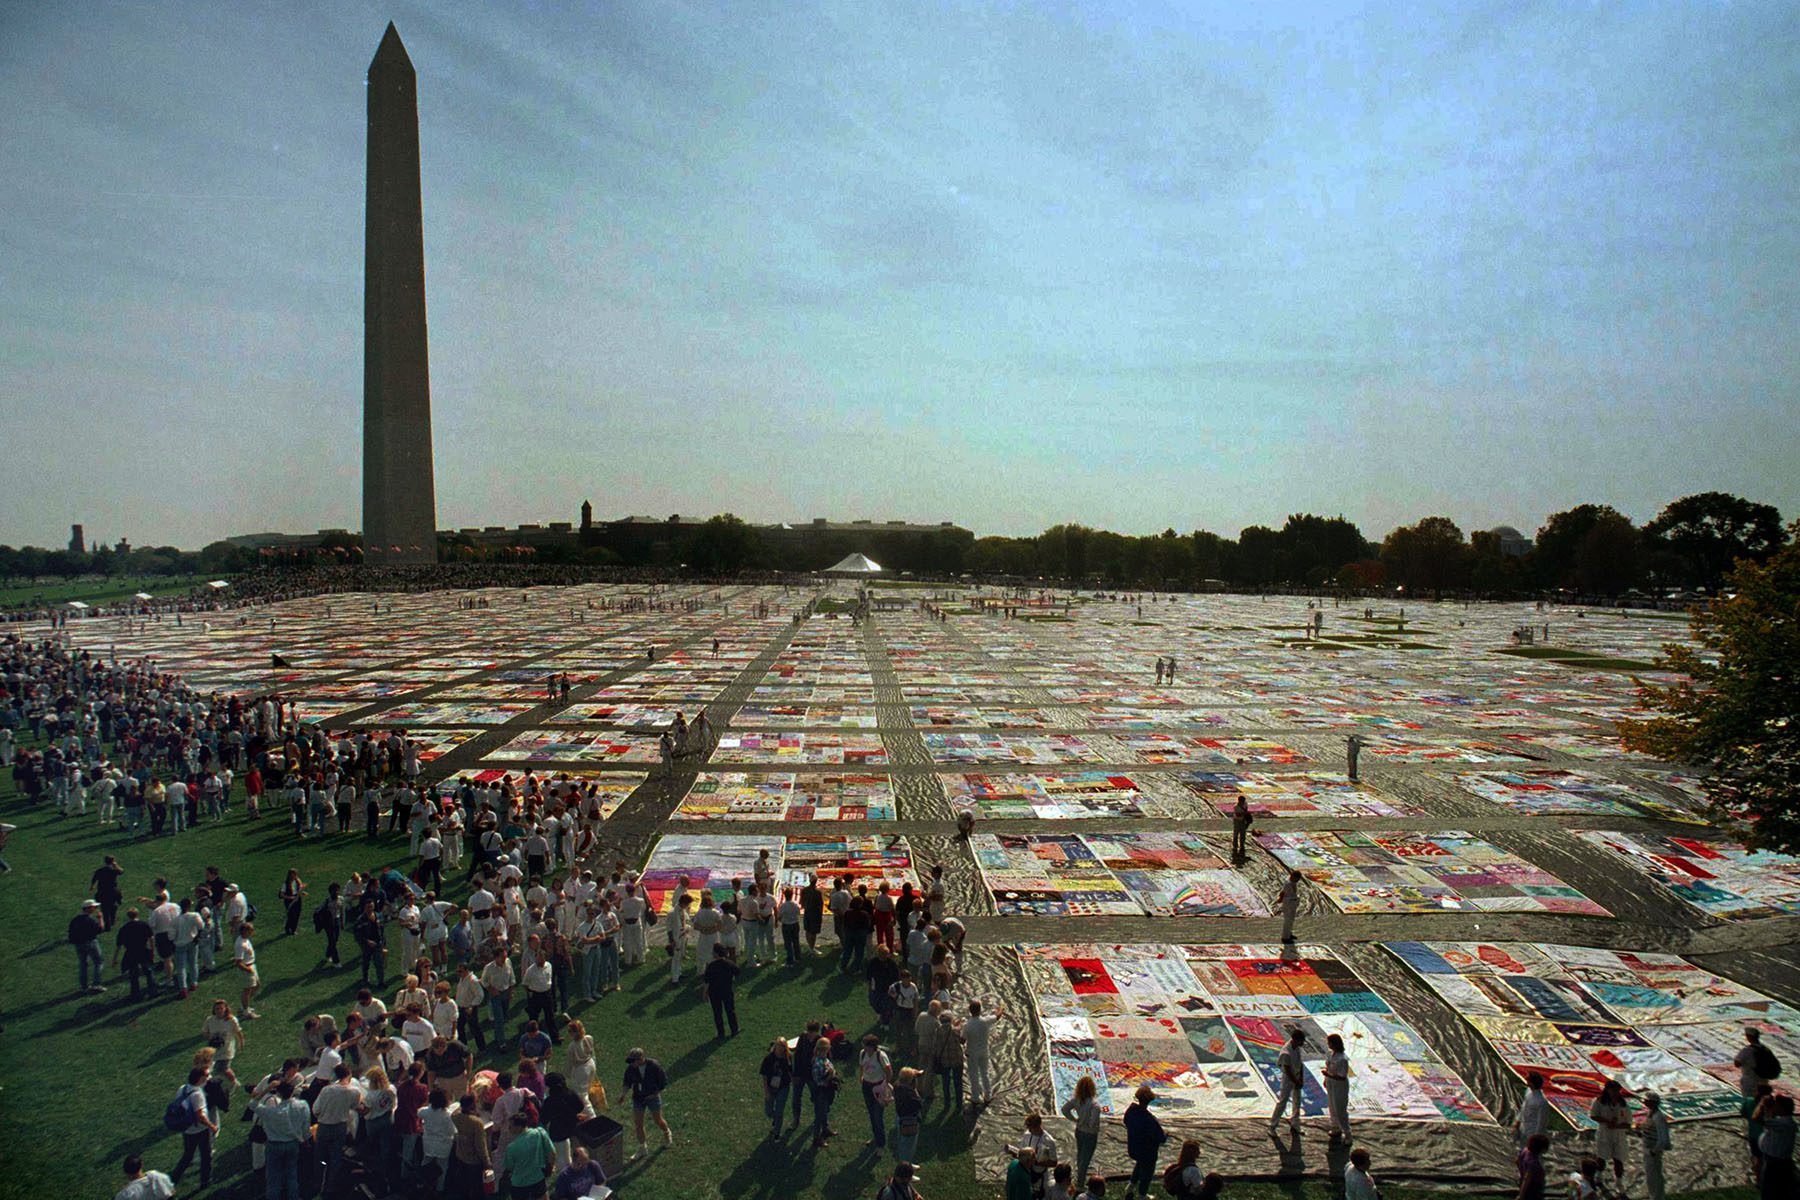 A view of the Washington Monuments captures a massive patchwork laid all around the lawn while crowds look at the patchwork.